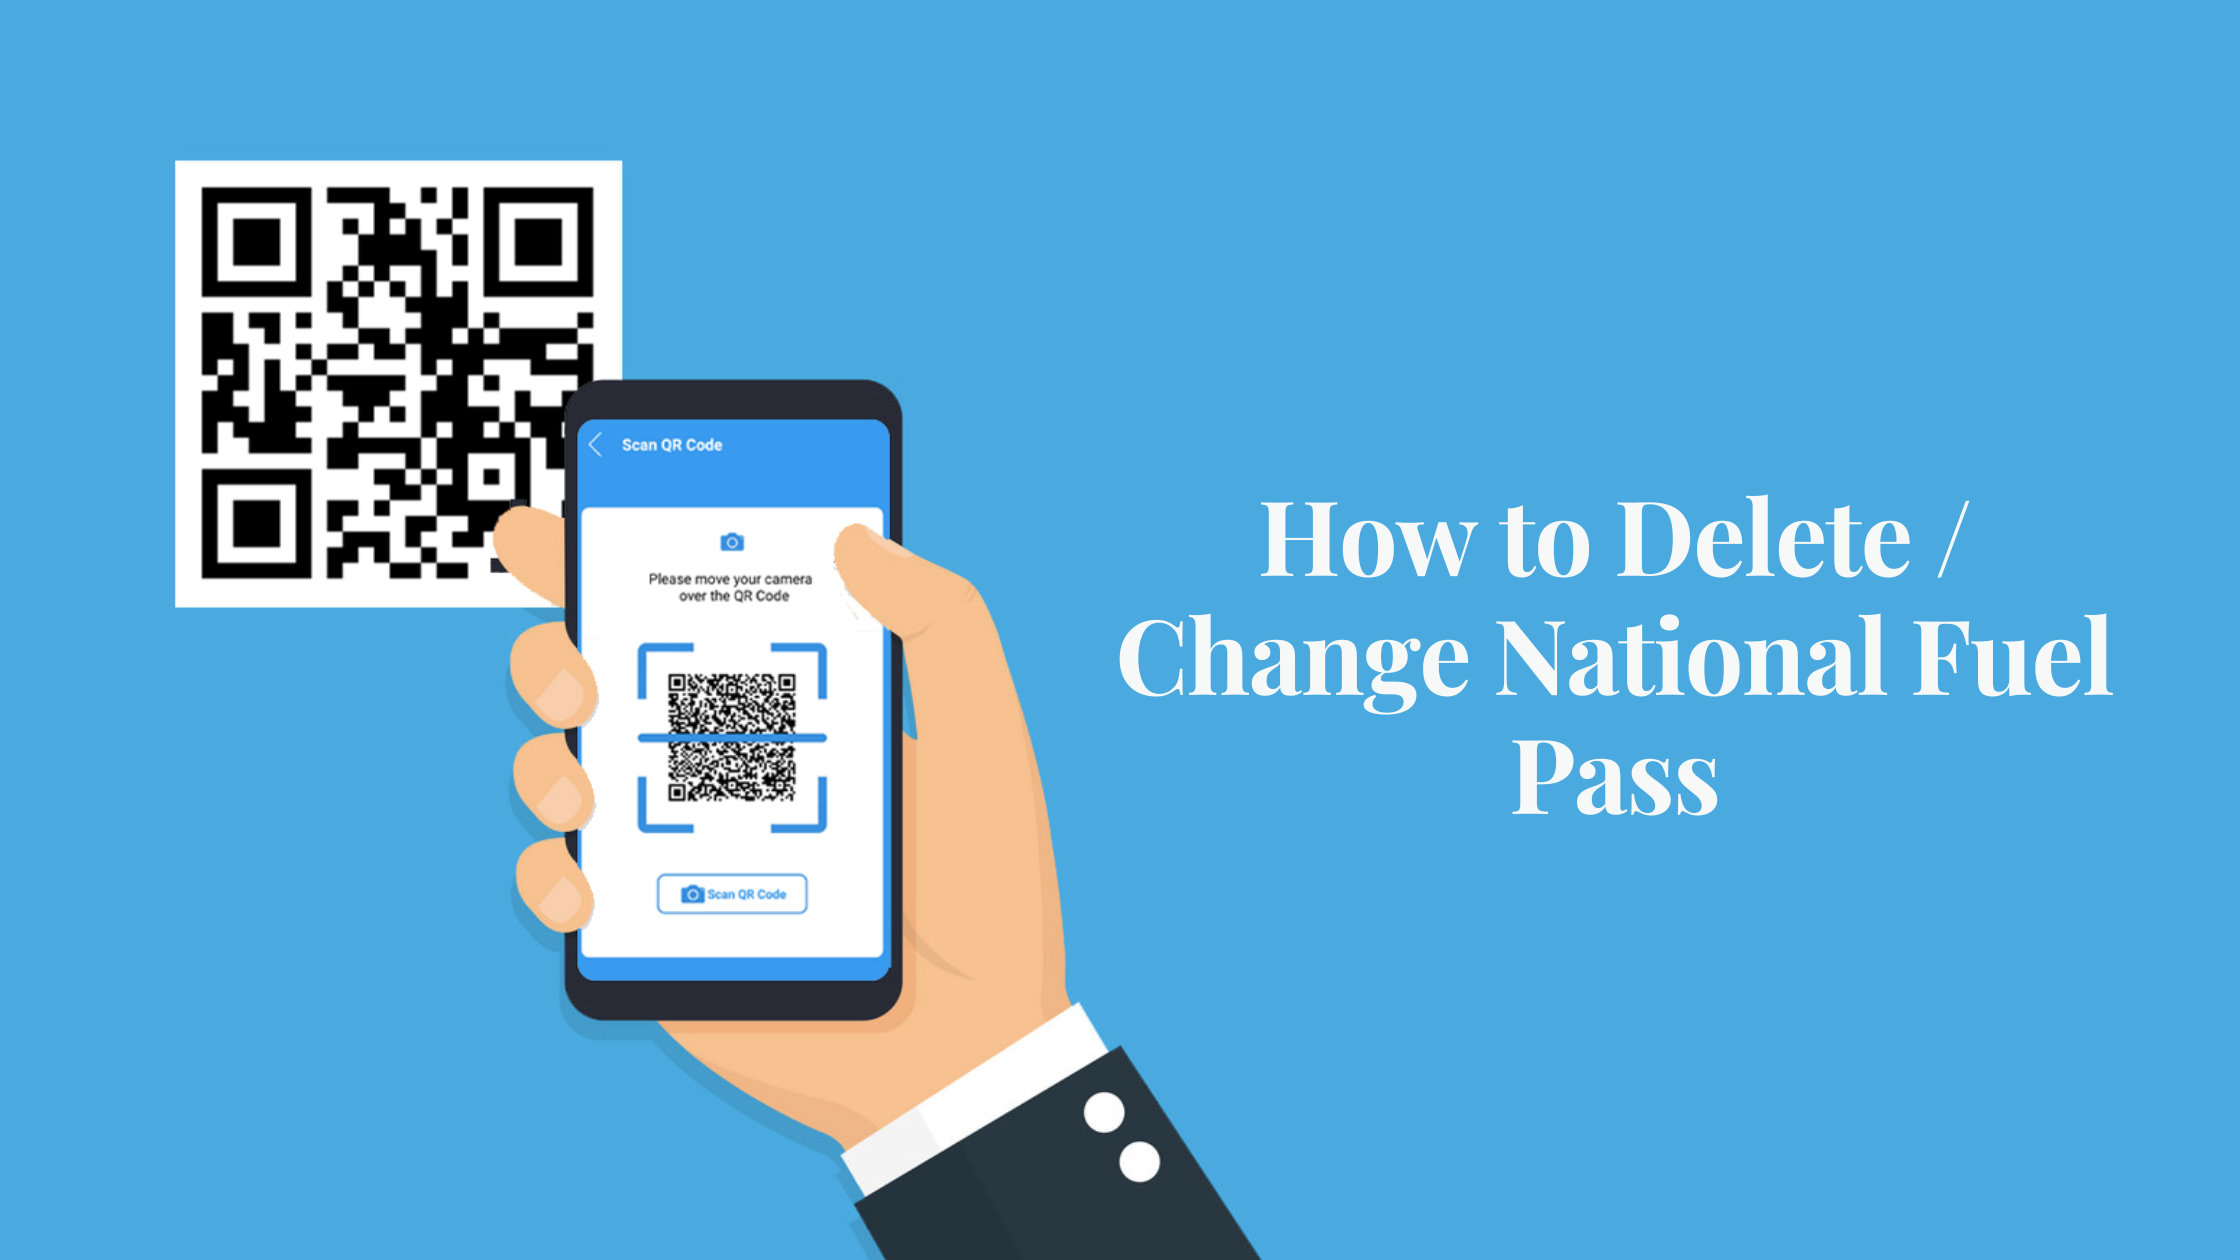 How to Delete Change National Fuel Pass